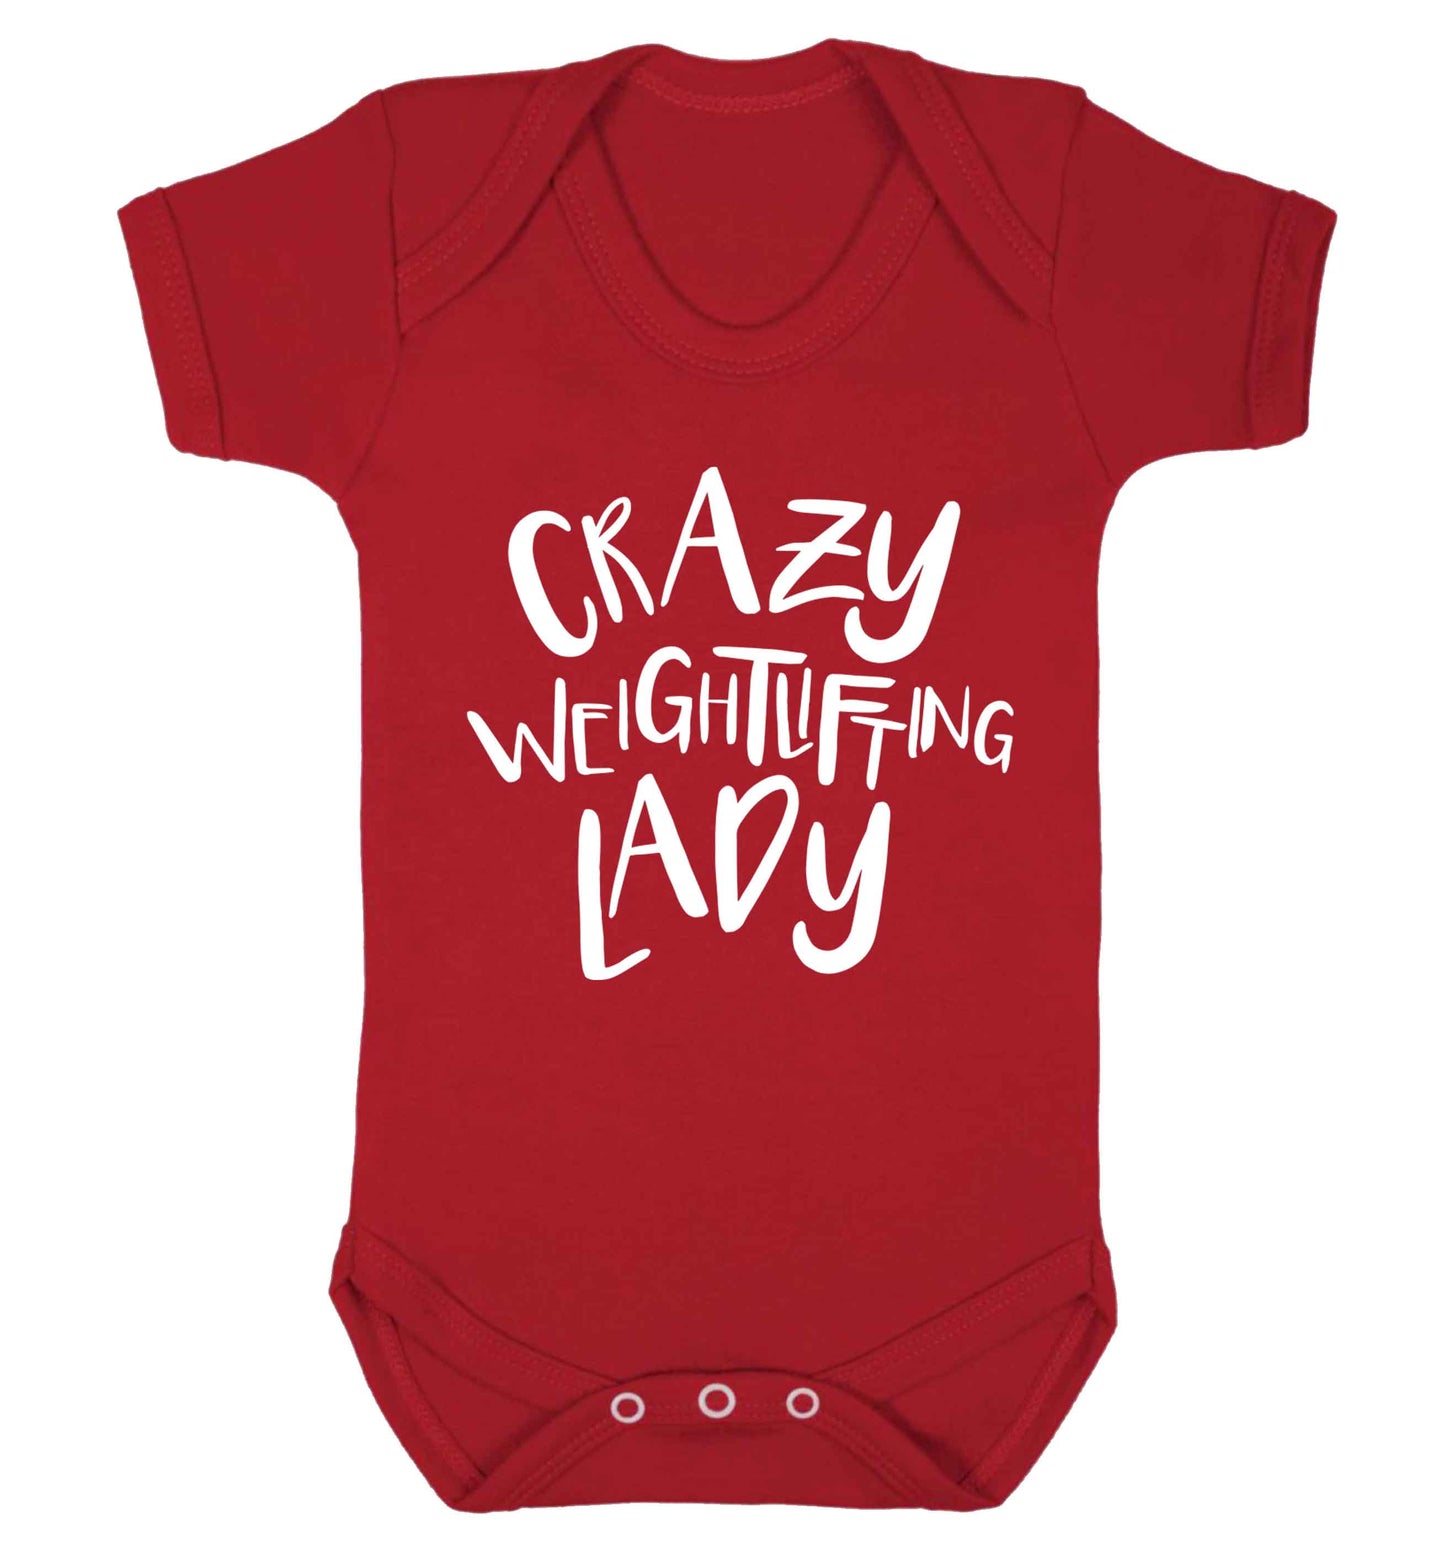 Crazy weightlifting lady Baby Vest red 18-24 months